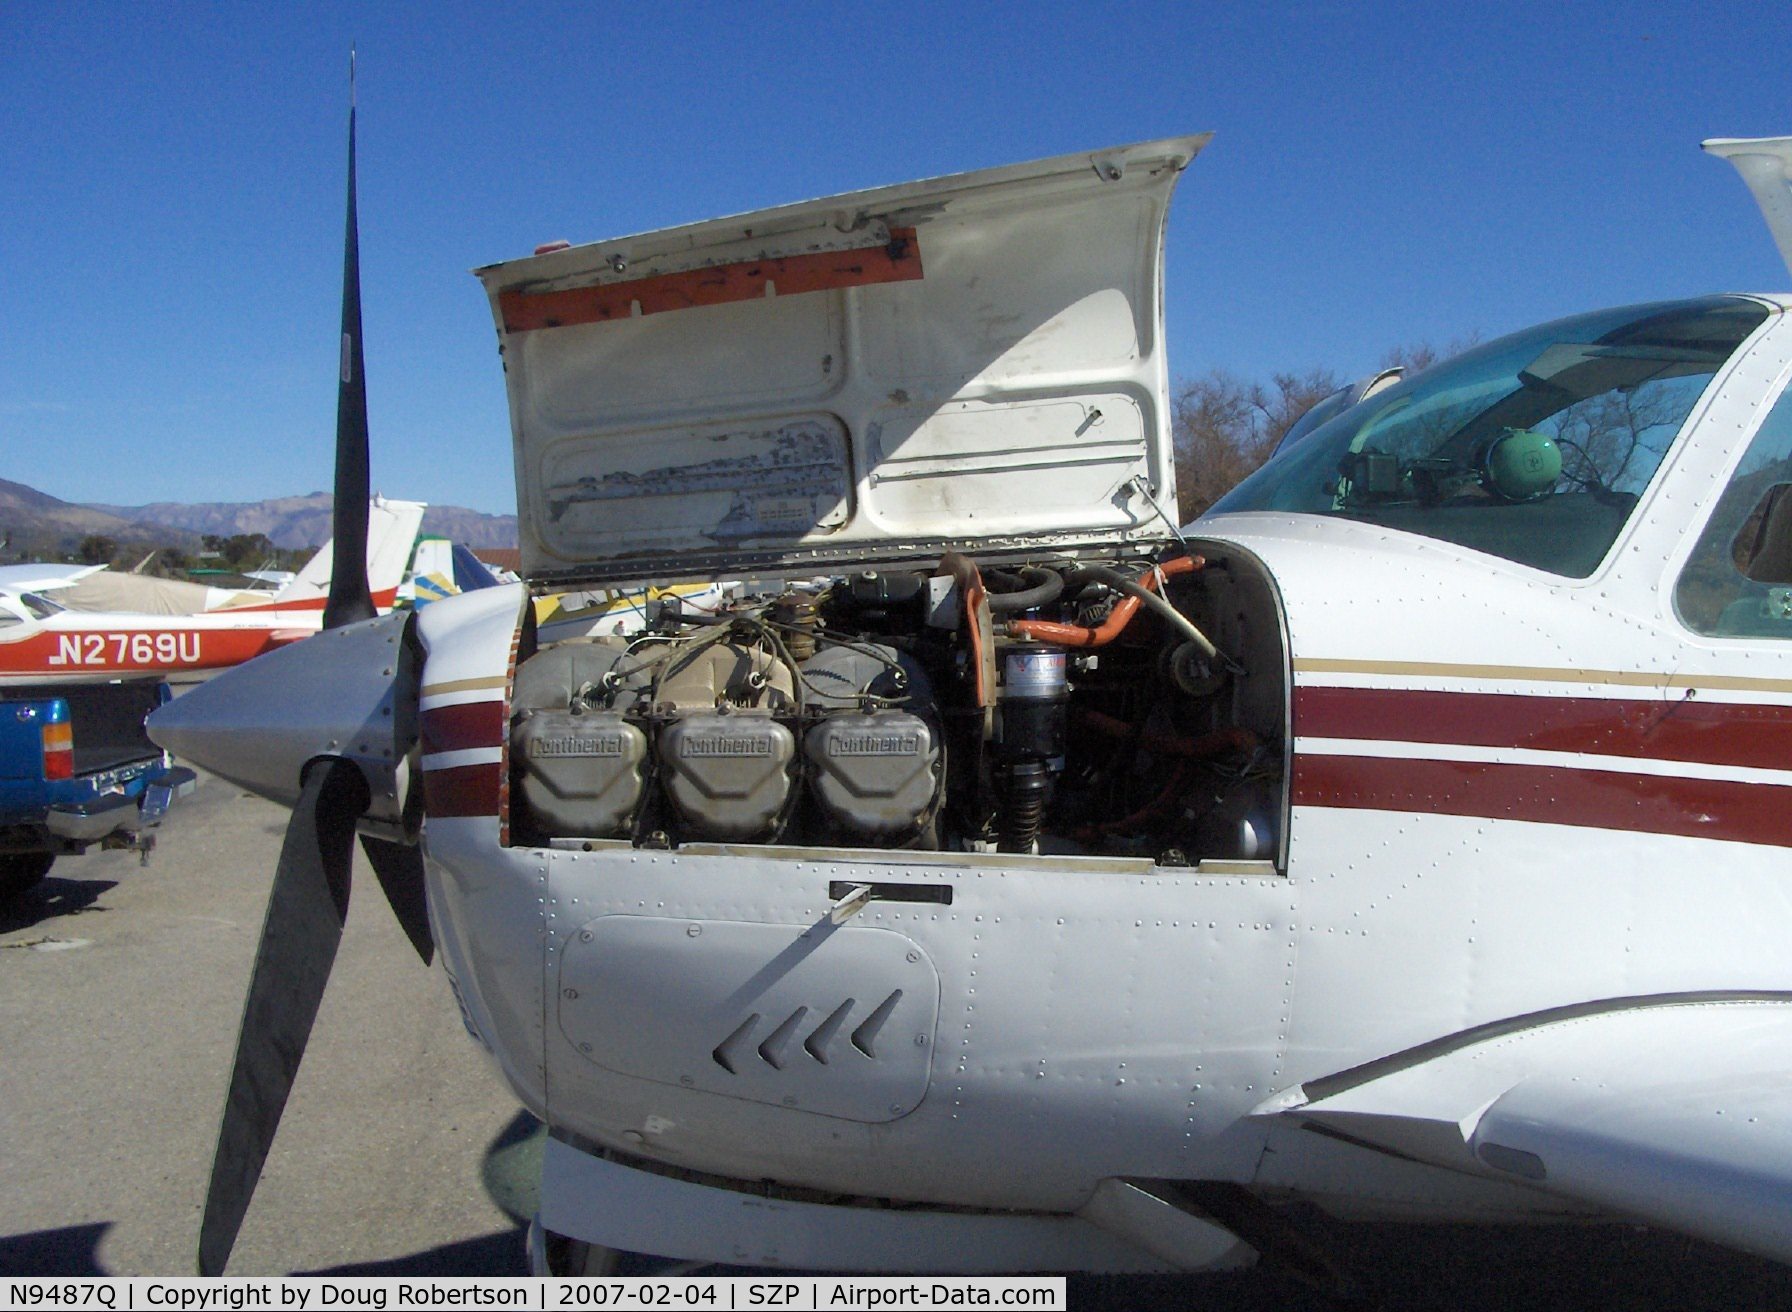 N9487Q, 1972 Beech V35B Bonanza C/N D-9333, 1972 Beech V35B BONANZA, Continental IO-520-B 285 Hp, cowling open for engine cool down at transient parking